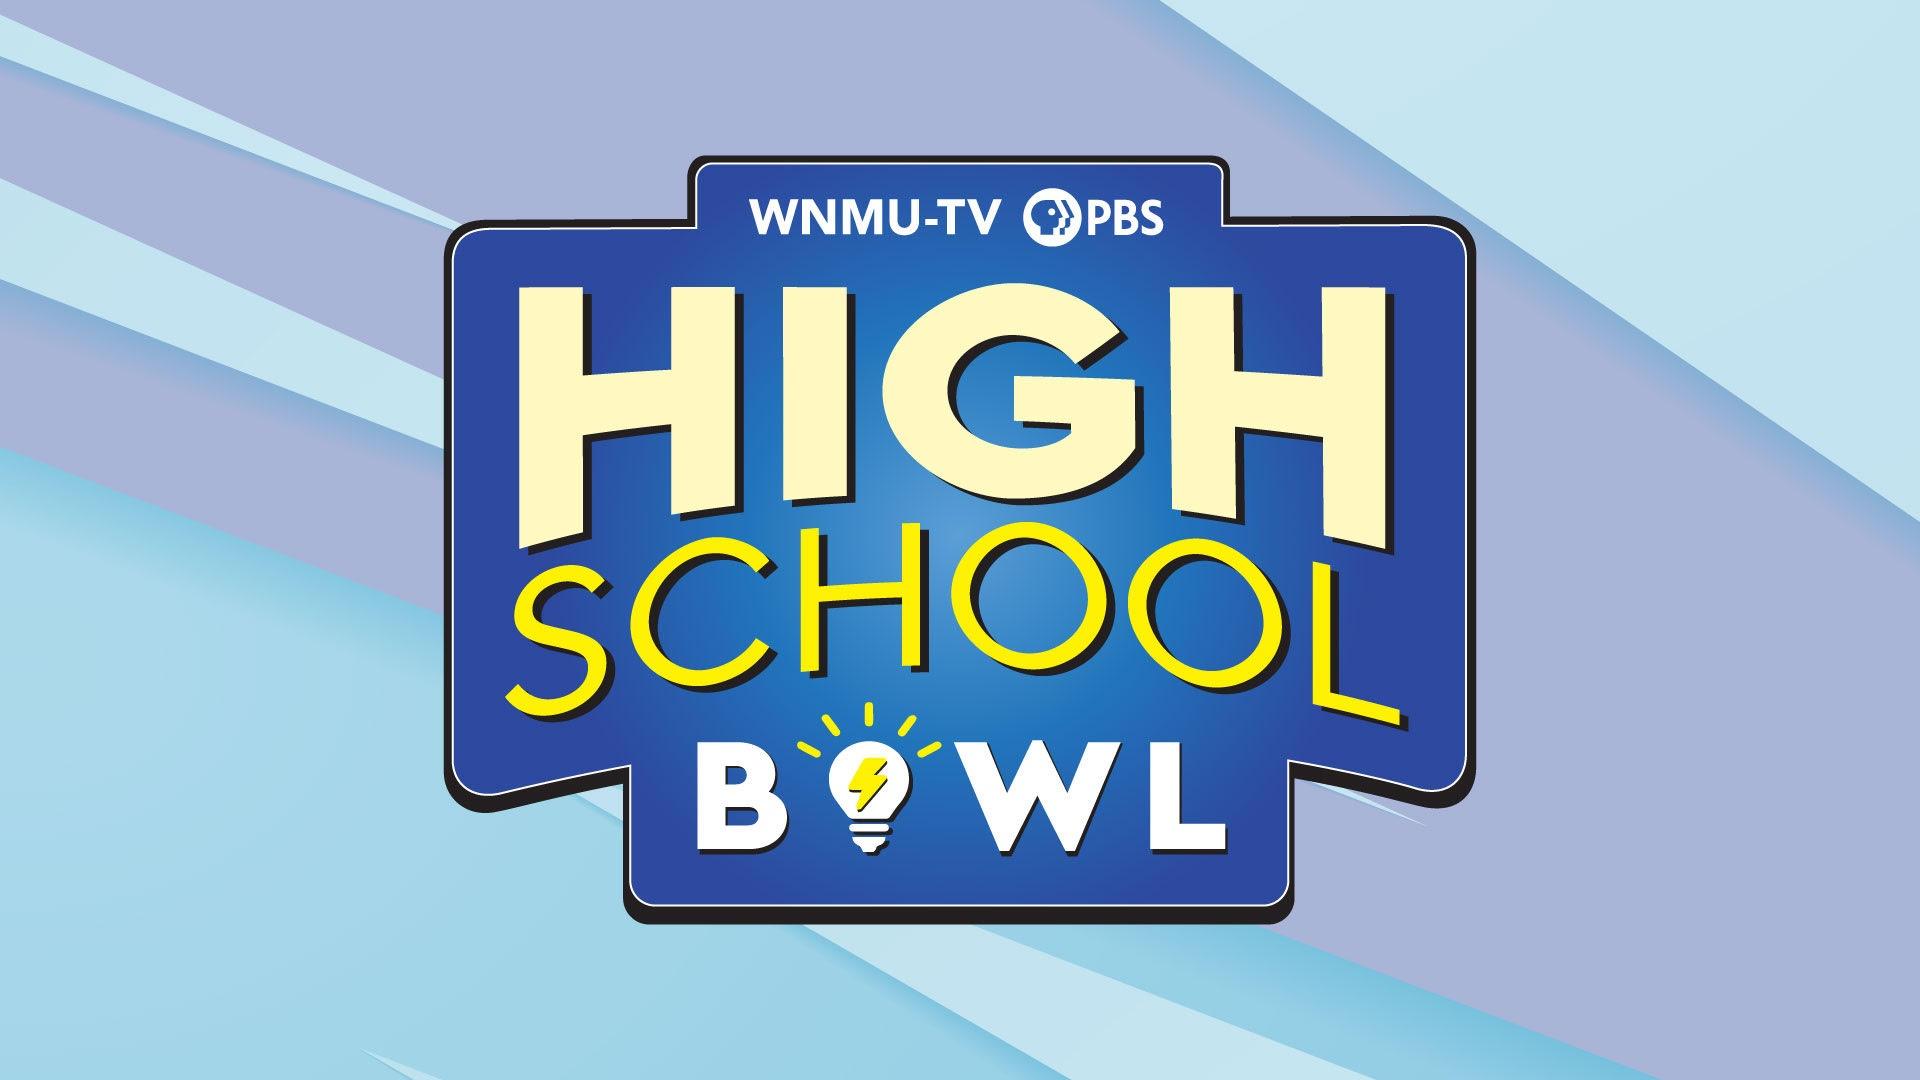 High School Bowl Season 44 airs Mondays at 1/12c and 8/7c on WNMU-MLC (broadcast channel 13.4).